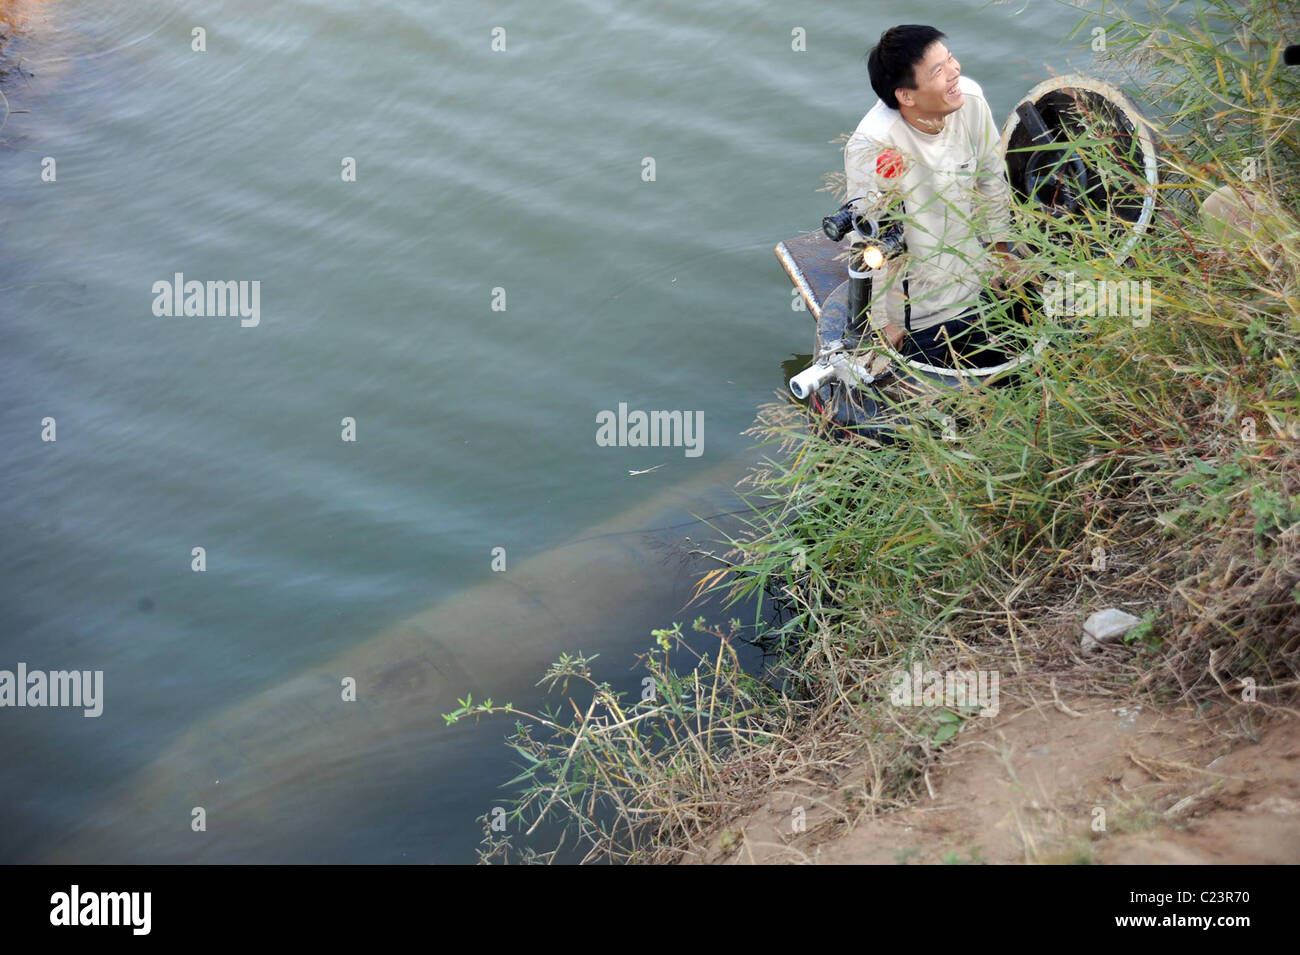 MAN BUILDS OWN SUB Madcap inventor Tao Xiangli is all at sea - he has built his own submarine. The boat-crazy 34-year-old Stock Photo